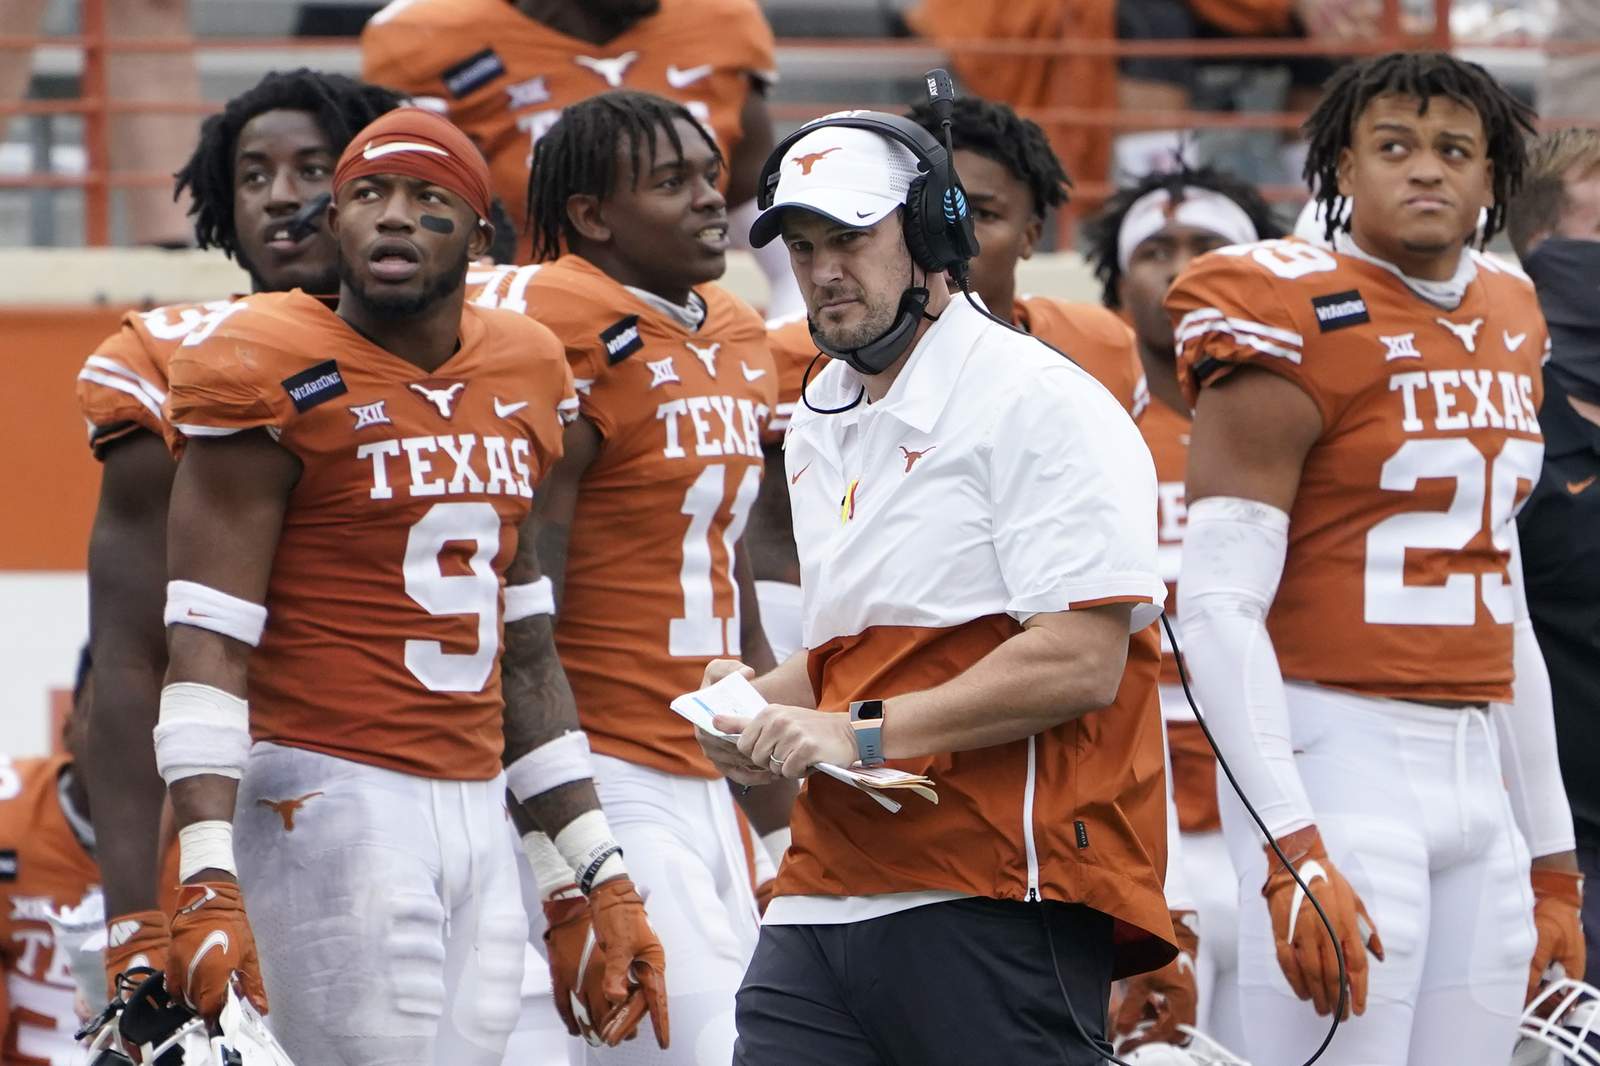 Herman returning in 2021 for 5th season with Texas Longhorns